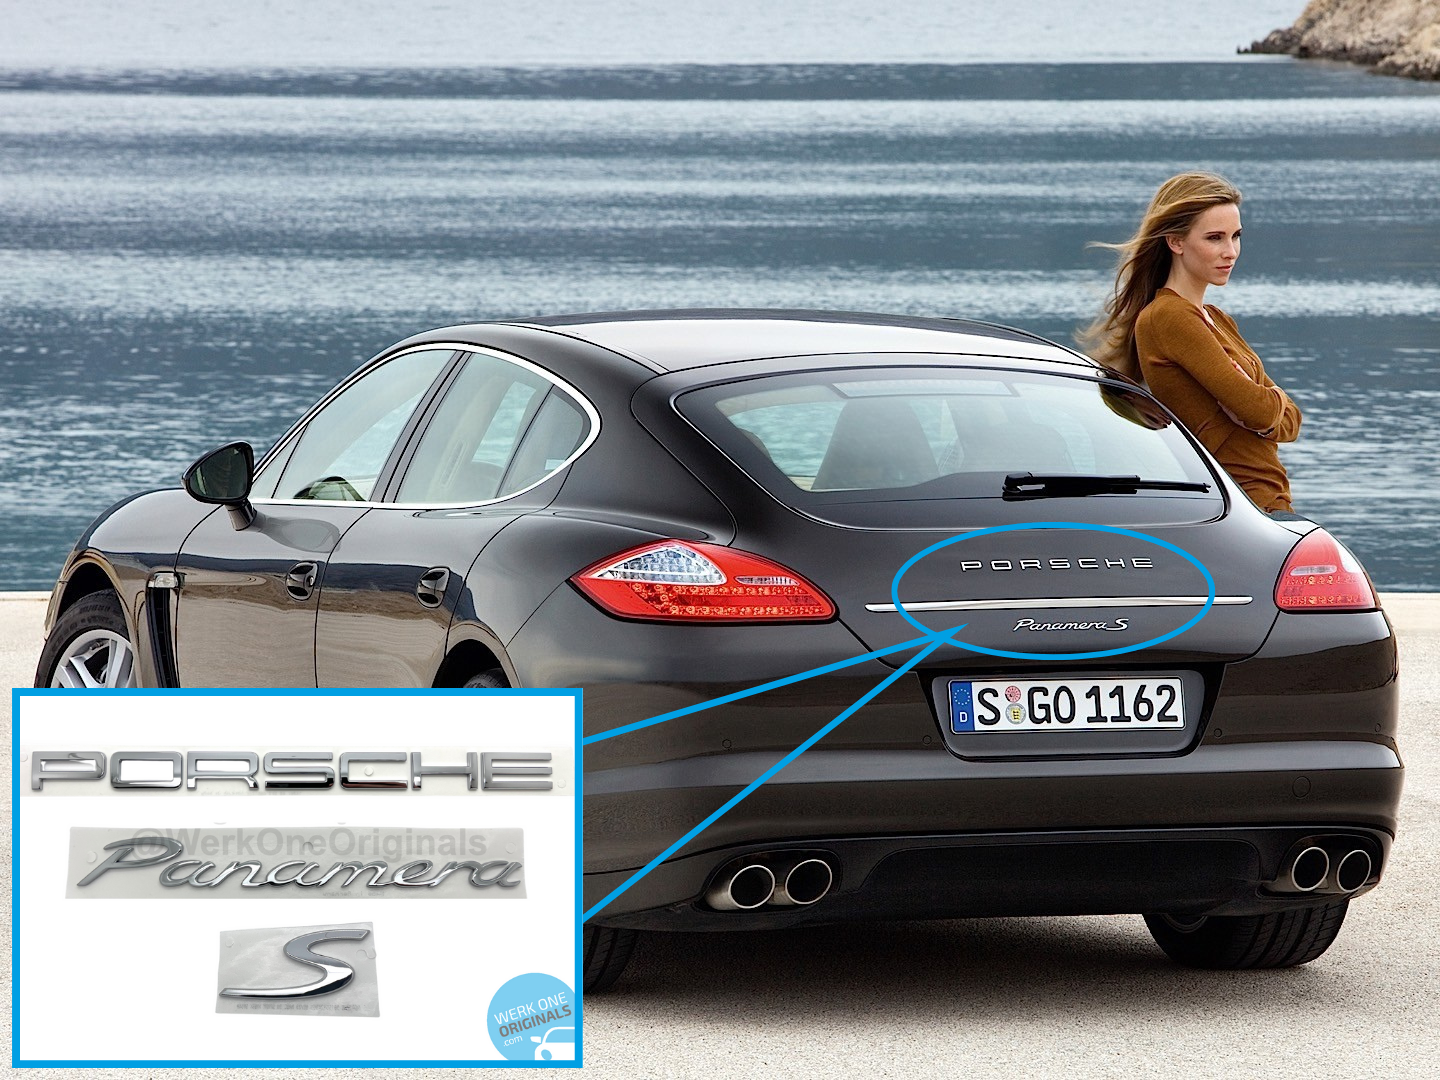 Porsche Official 'Porsche Panamera S' Rear Badge Decal in Chrome Silver for Panamera S Type 907 & 970 Models